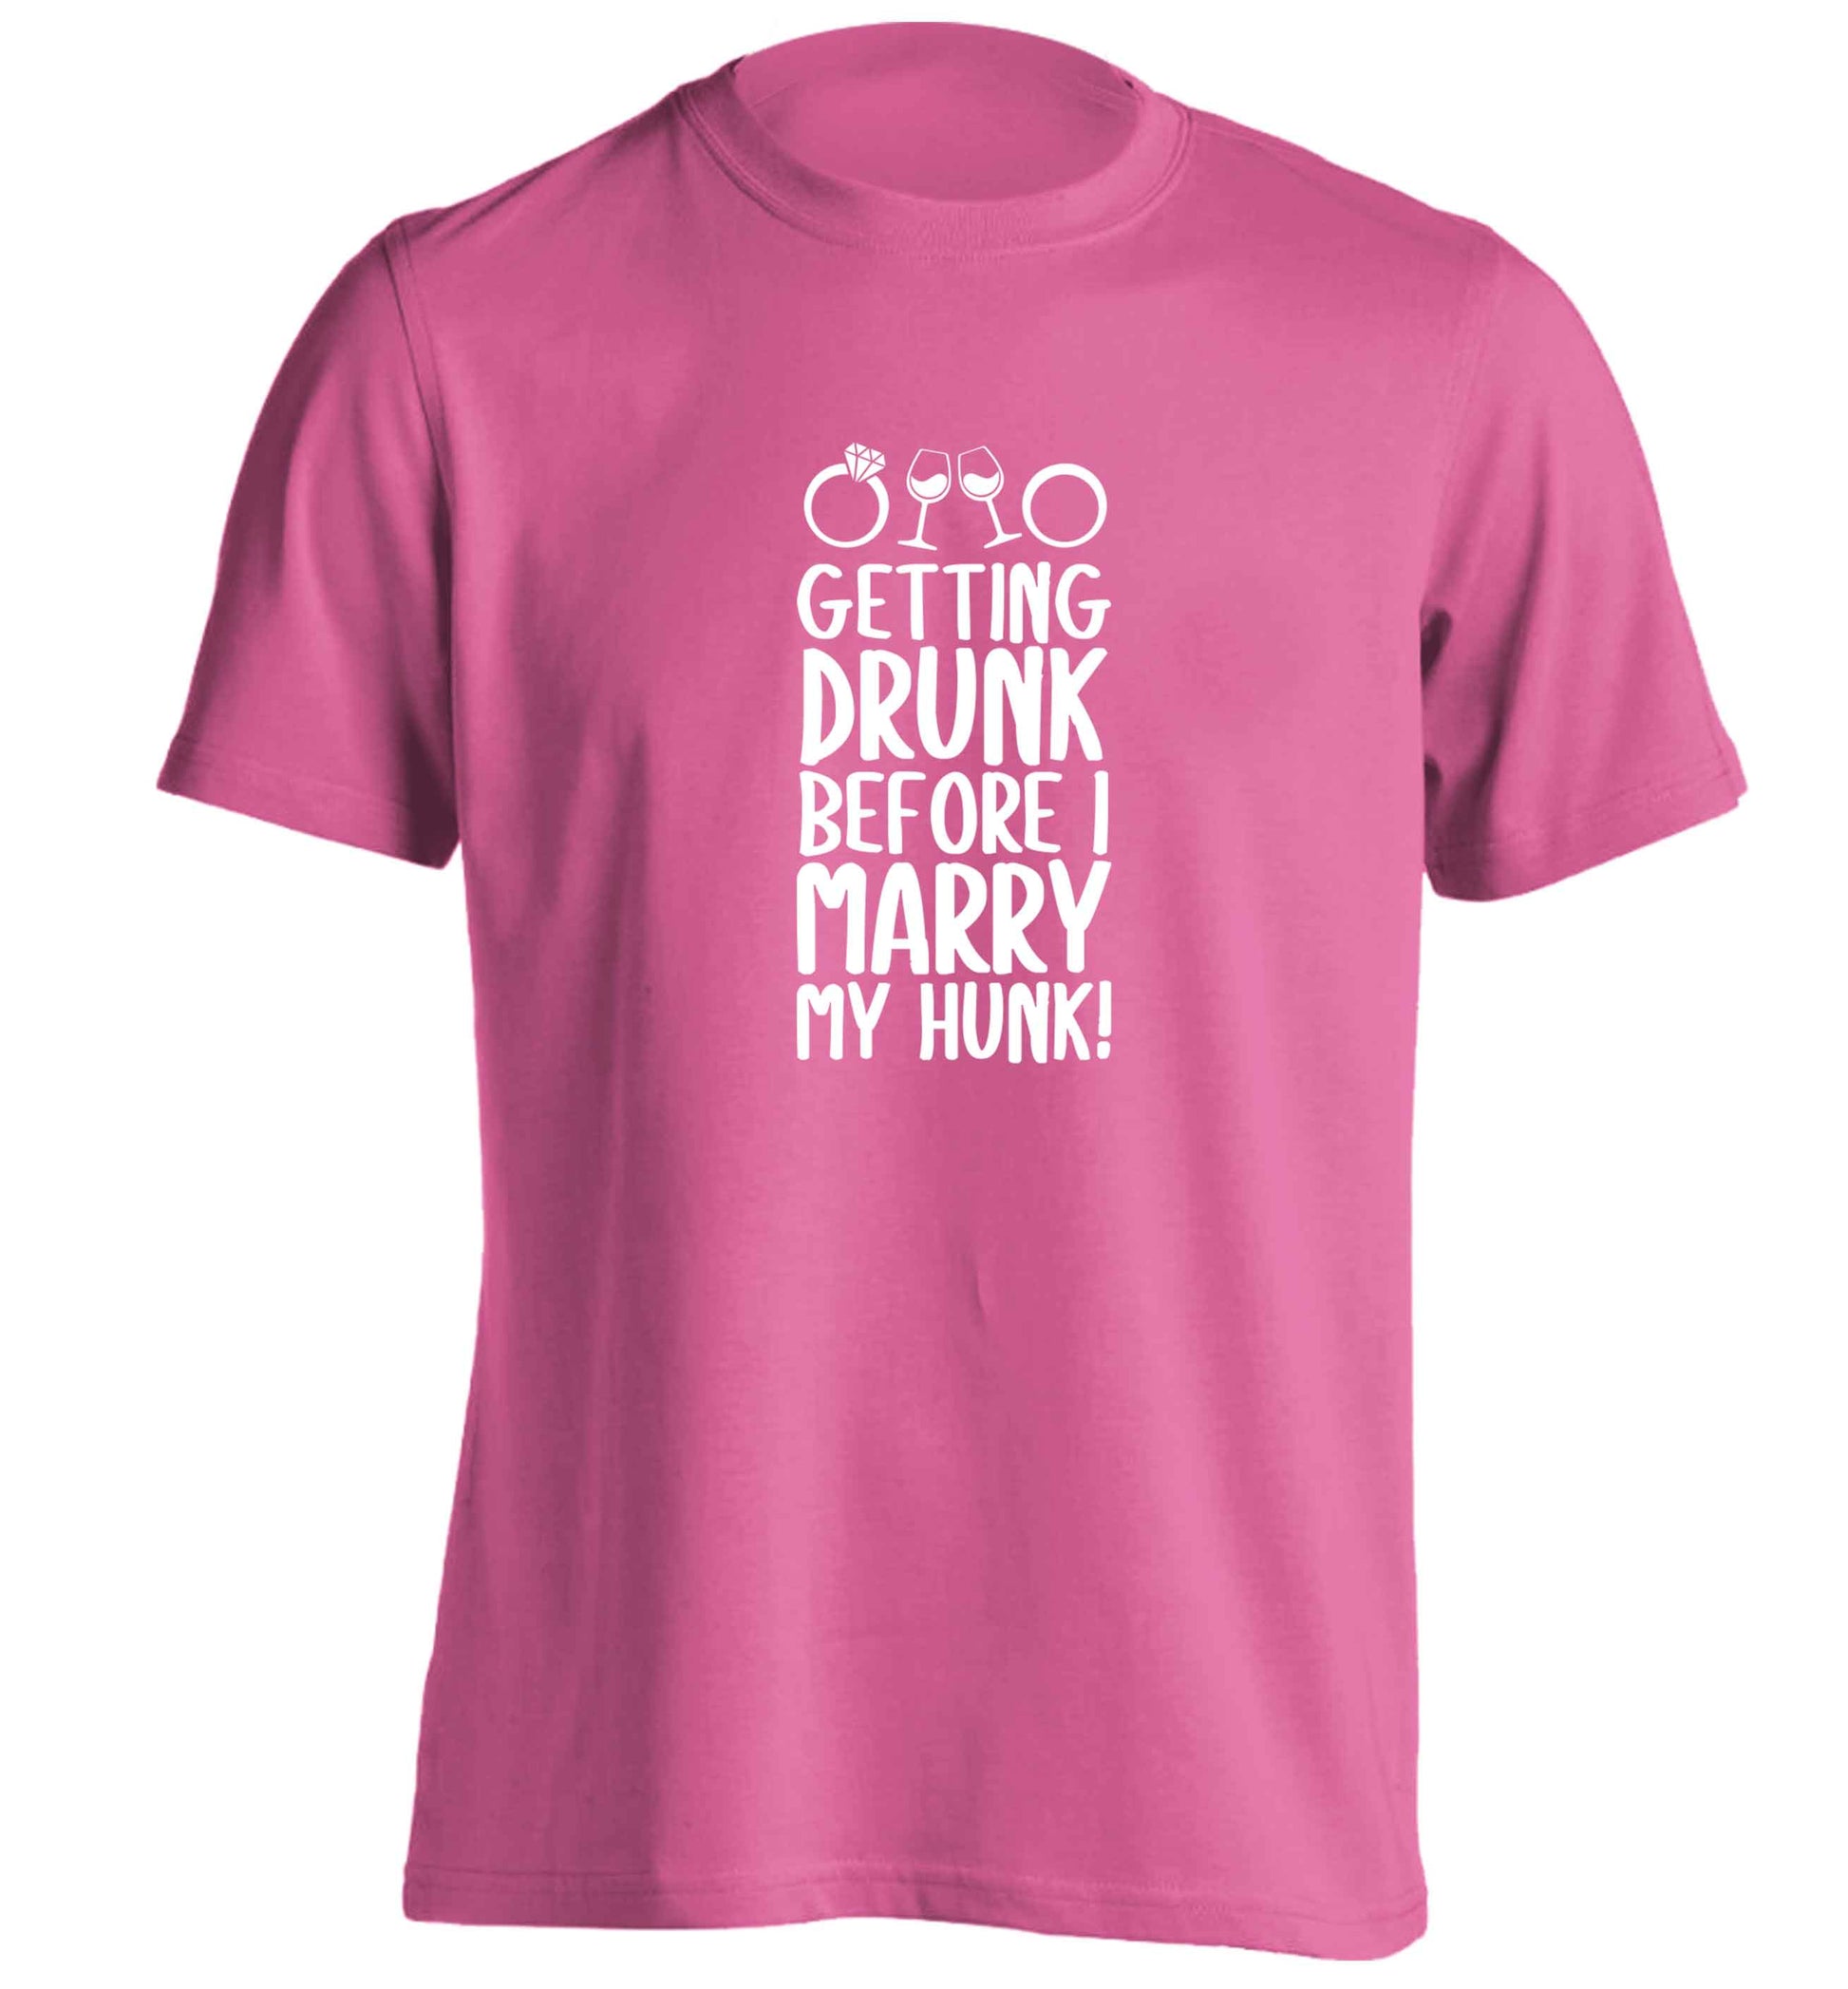 Getting drunk before I marry my hunk adults unisex pink Tshirt 2XL